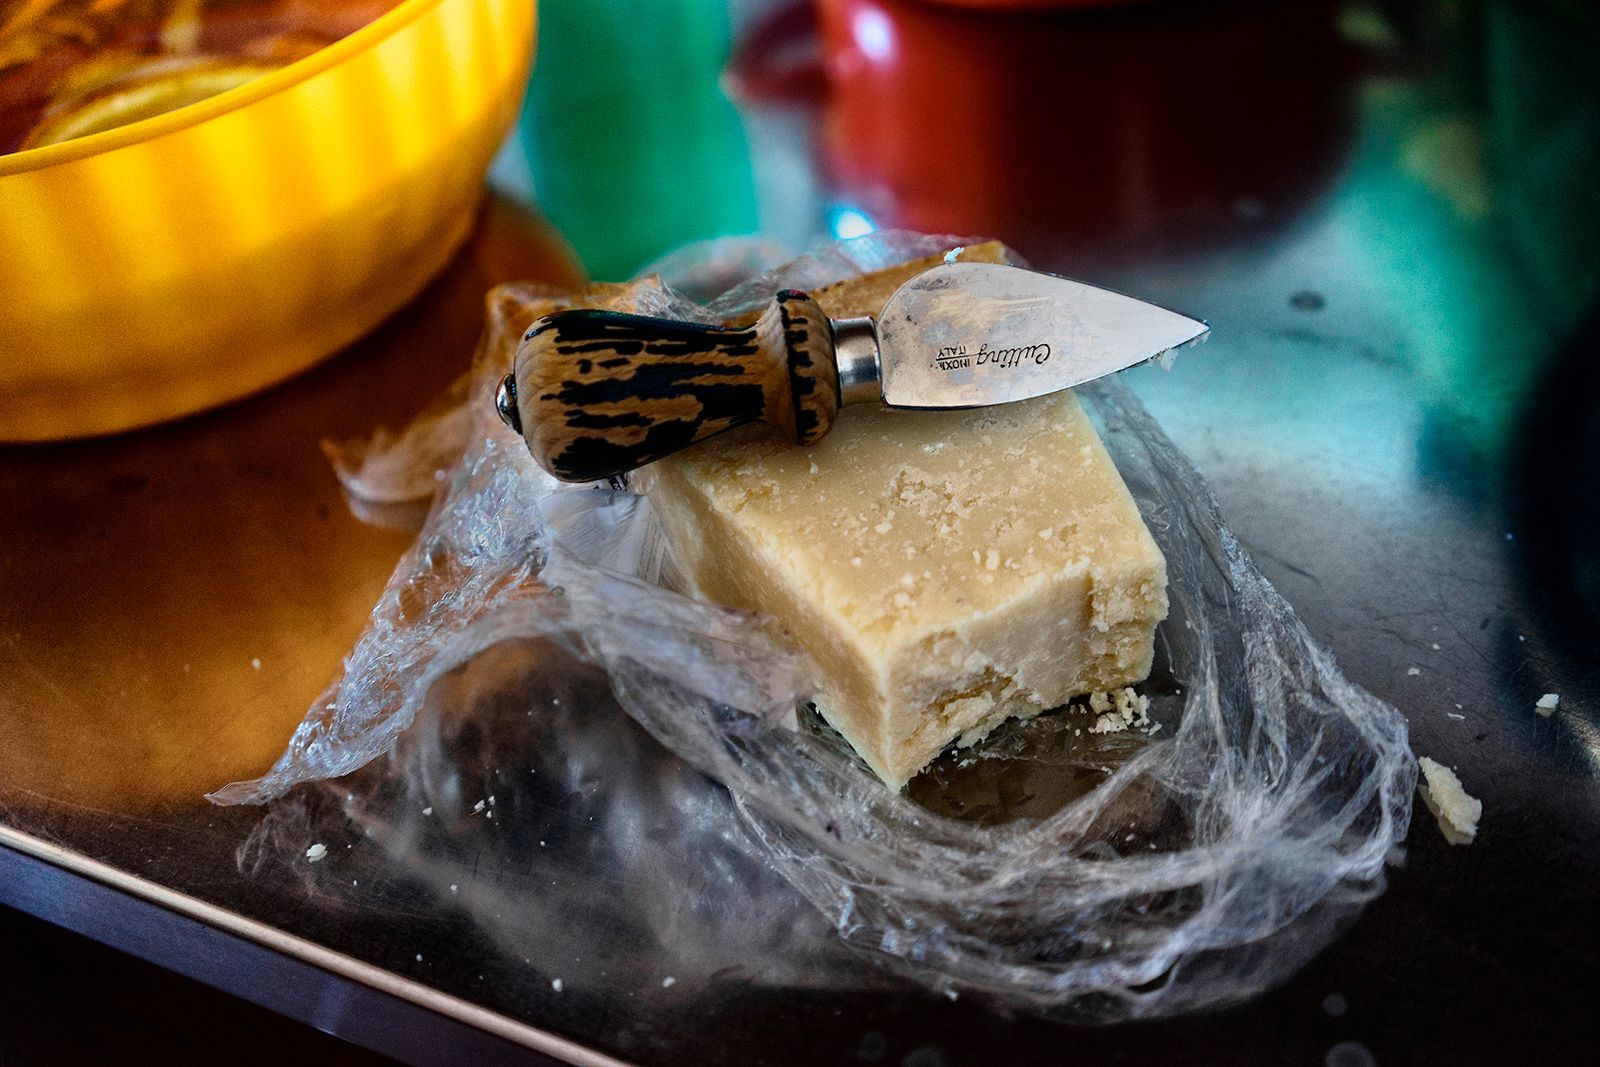 © Simona Bonanno - Parmesan cheese has to be cute with the apposite knife.